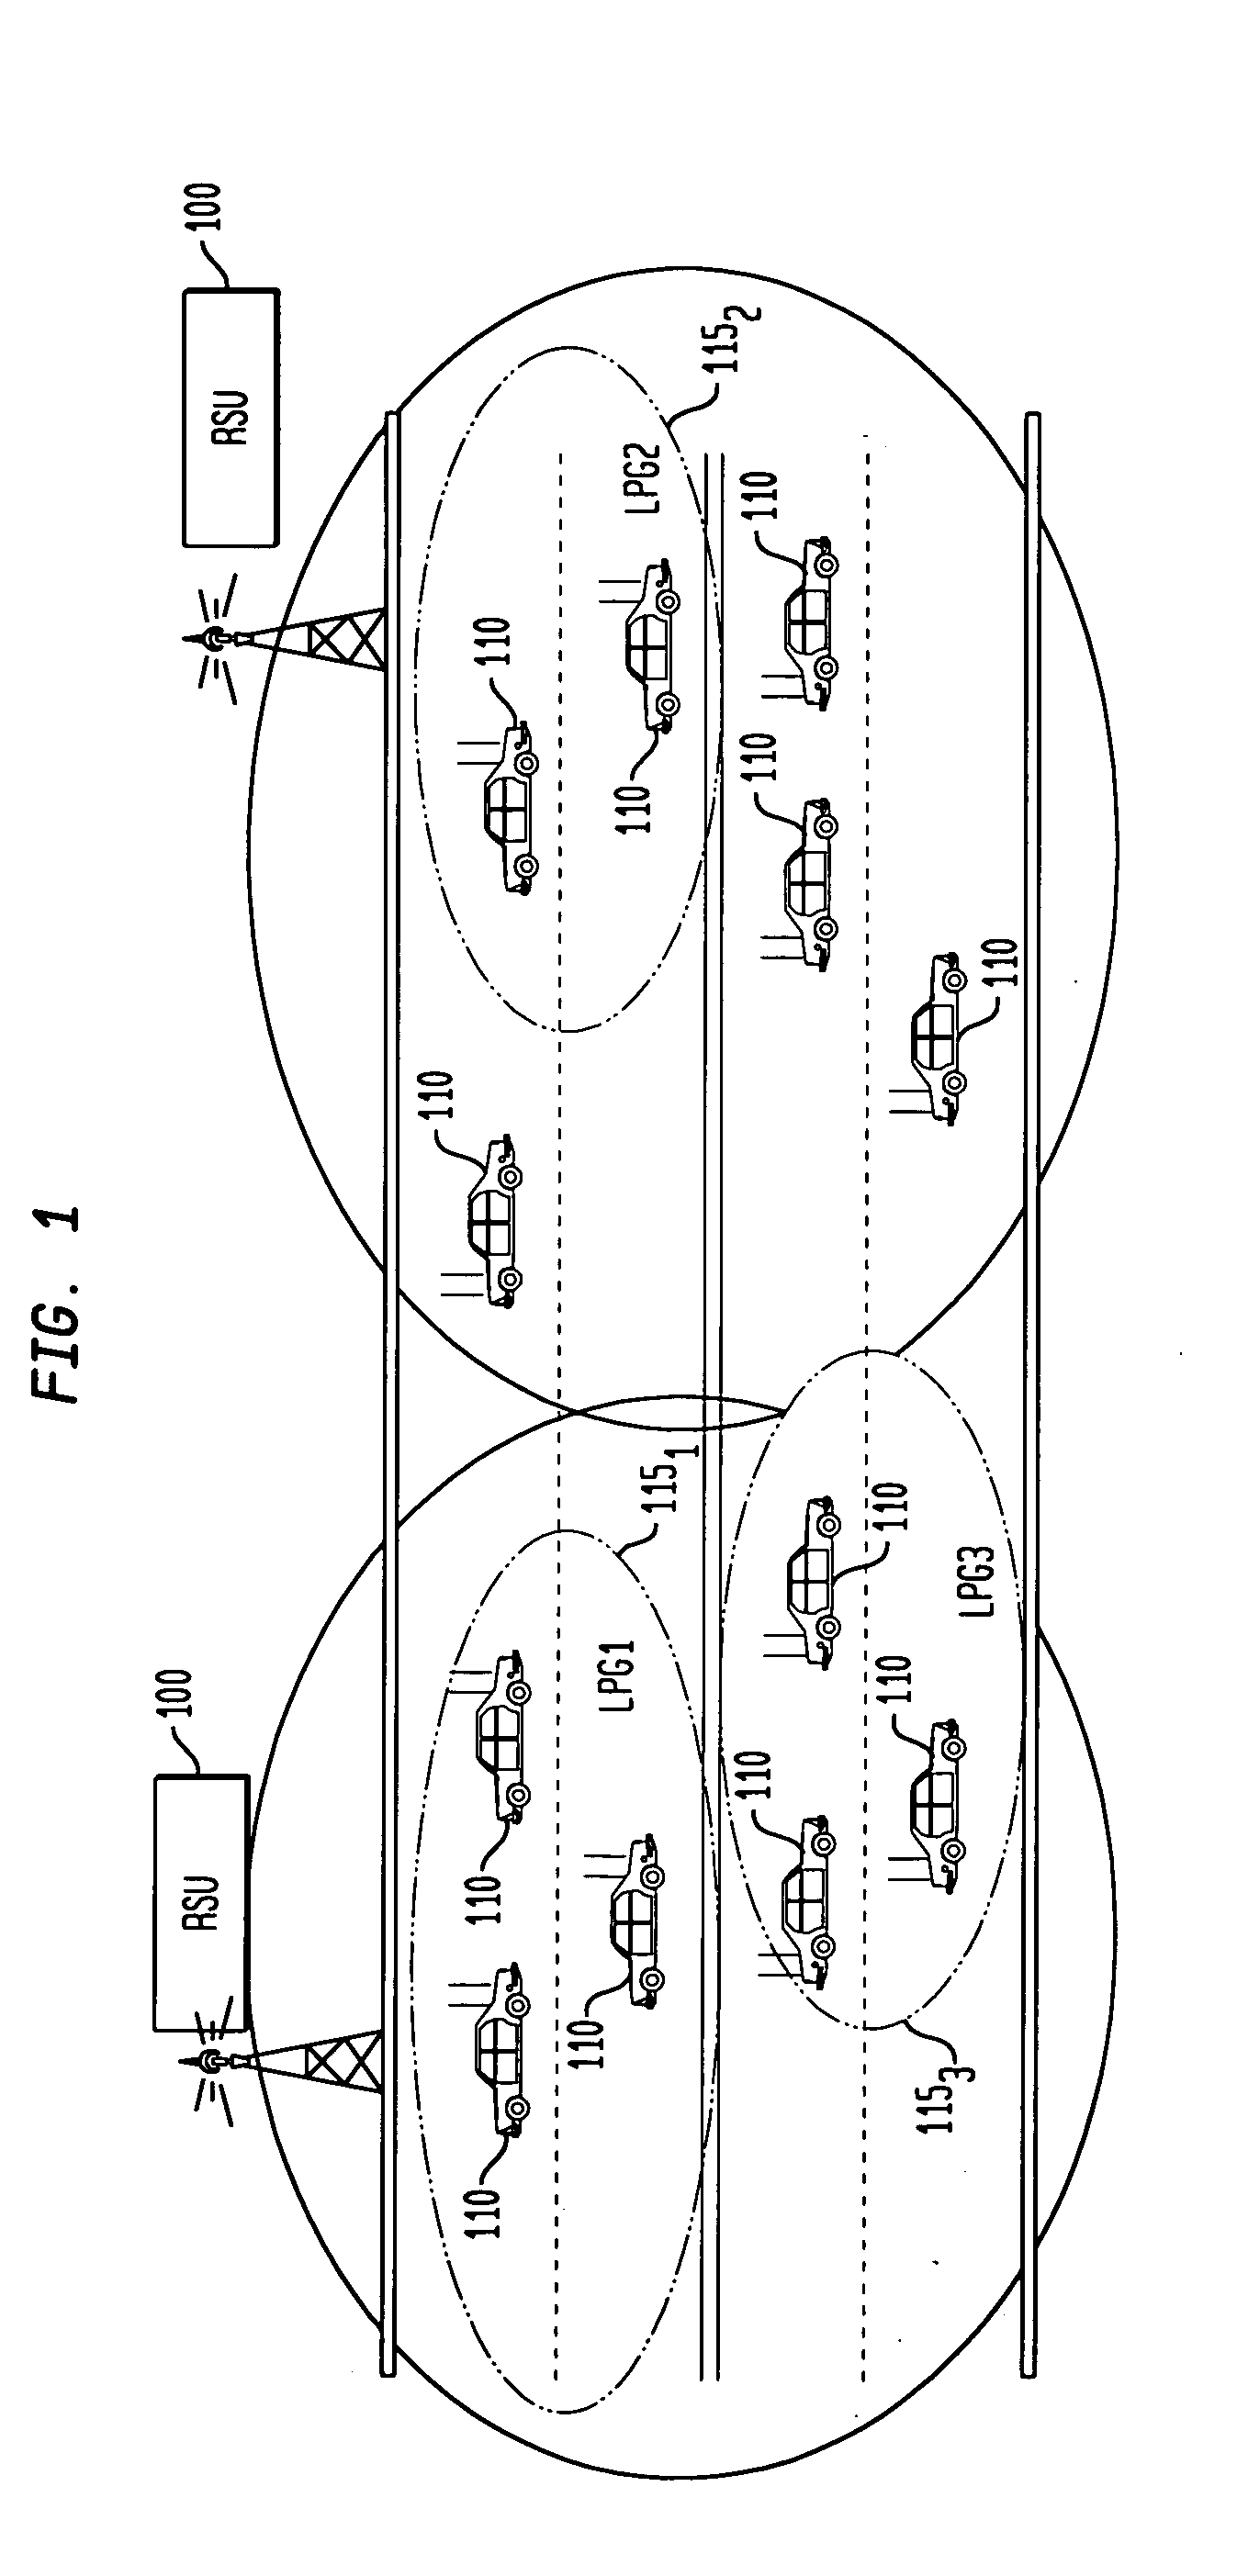 Method and communication device for routing unicast and multicast messages in an ad-hoc wireless network